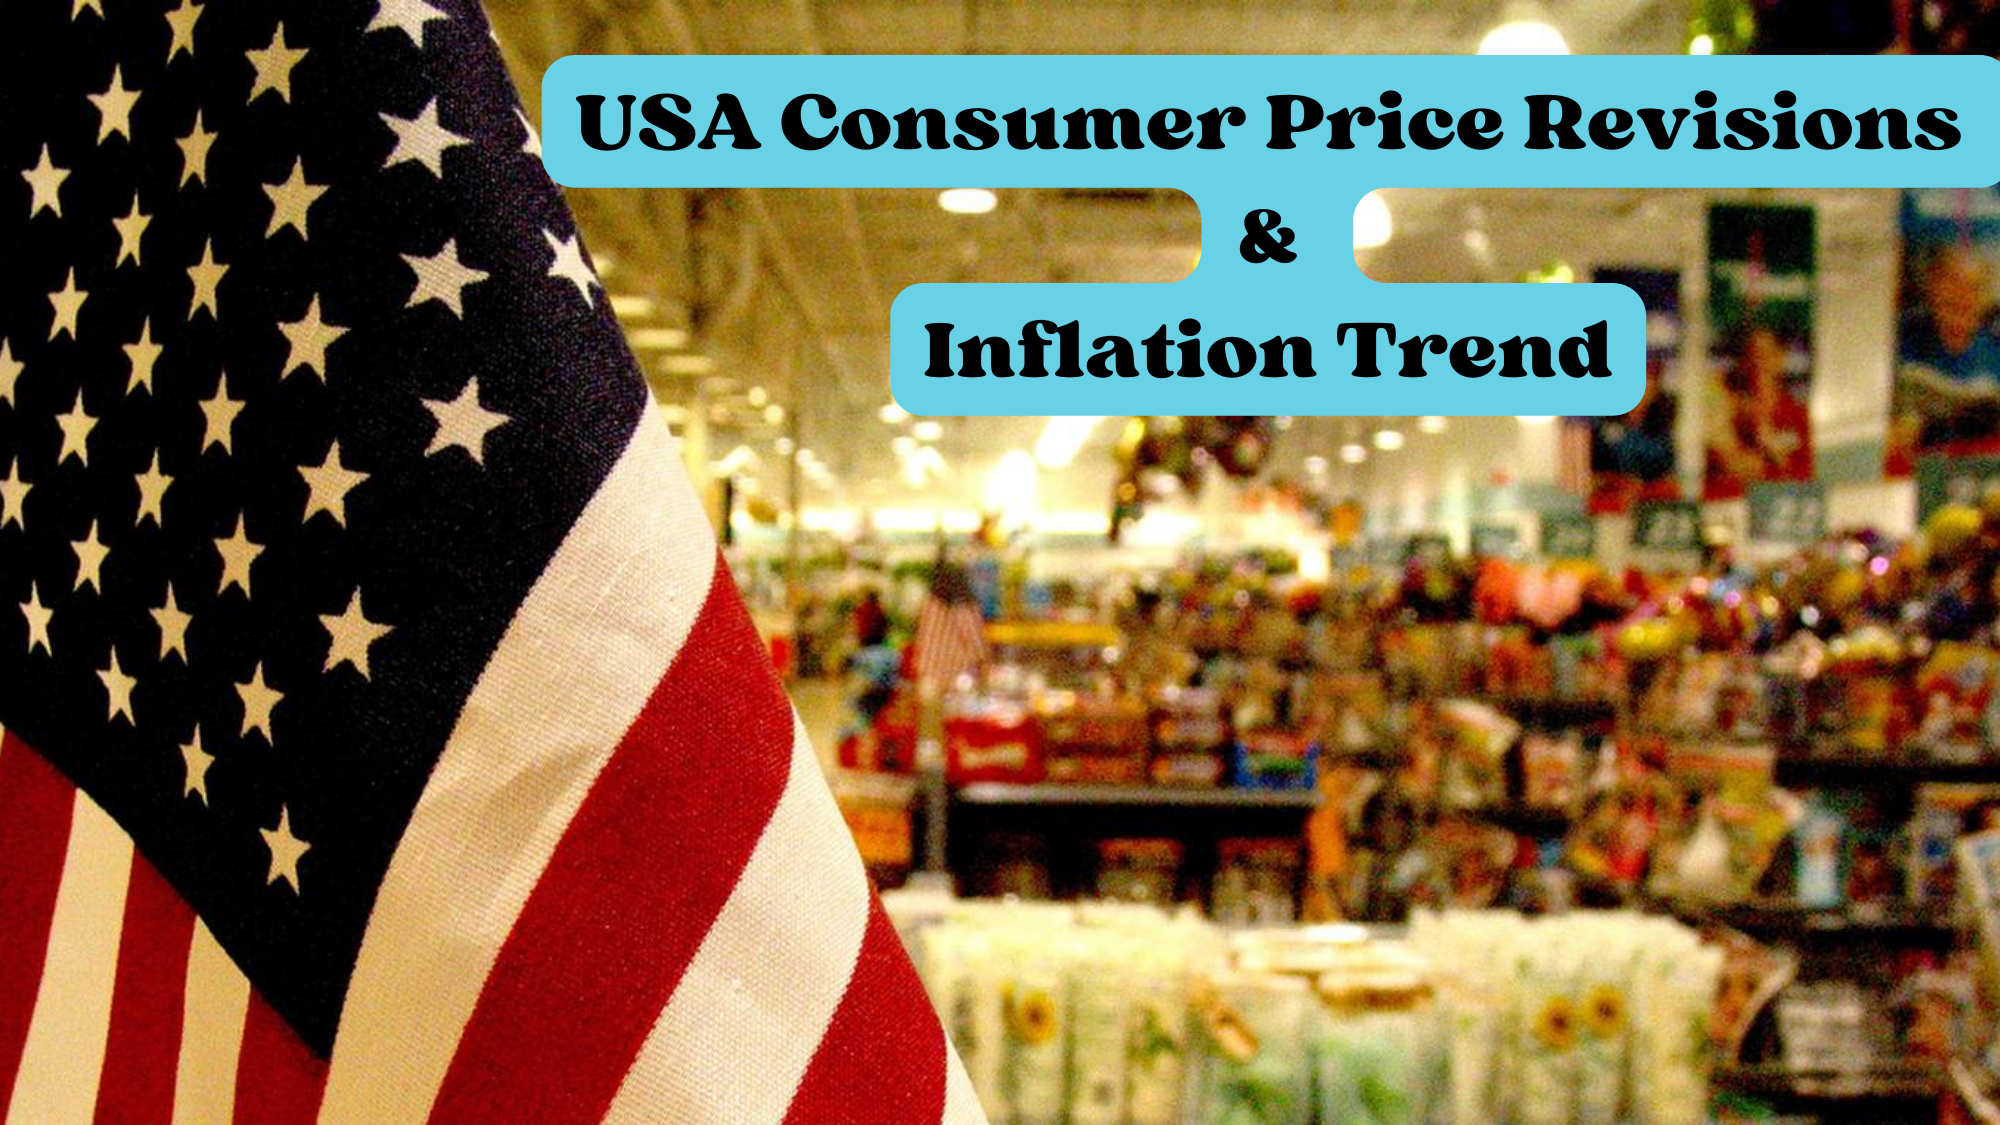 US Consumer Price Revisions, Expert opinions on the implications on the overall inflation trend